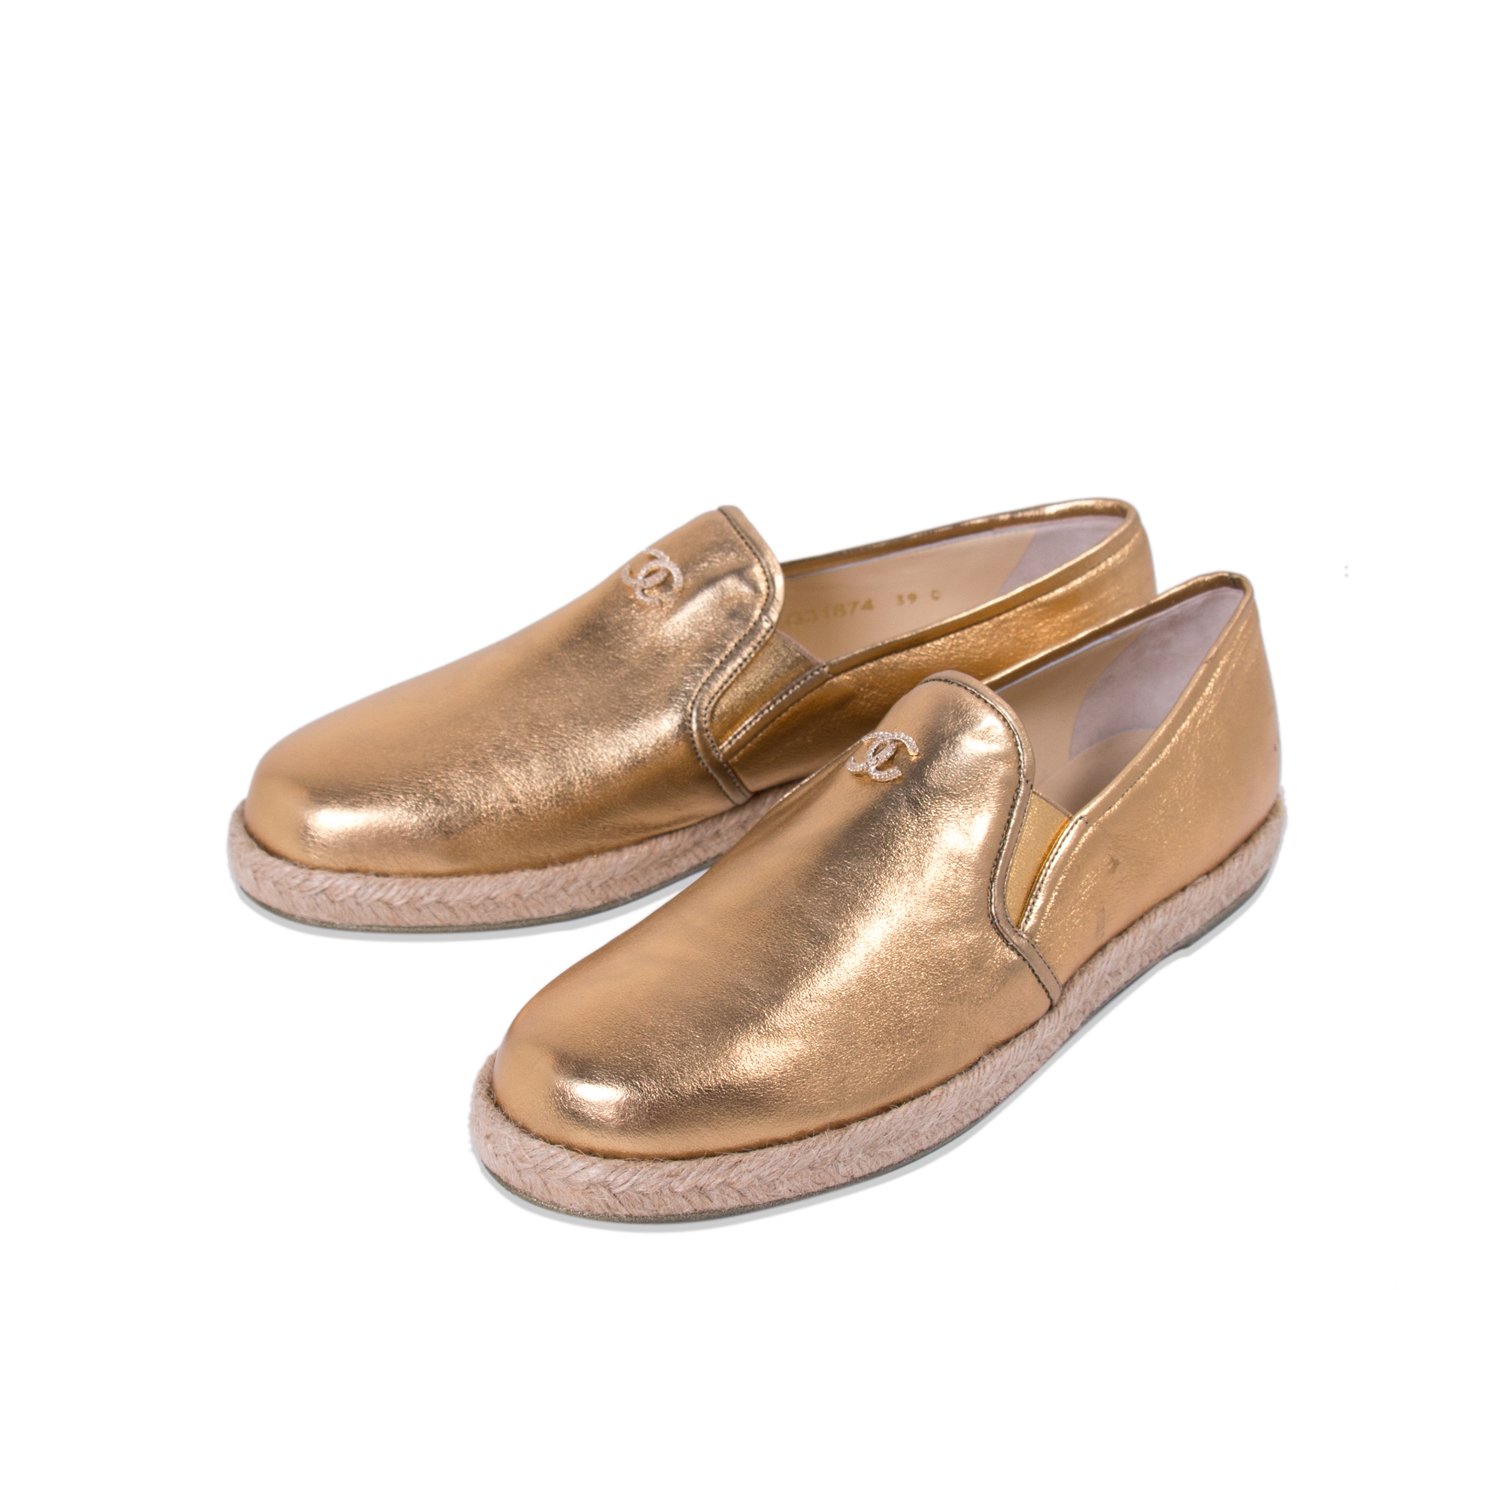 Chanel Metallic Gold Leather Espadrille Loafers Size 39